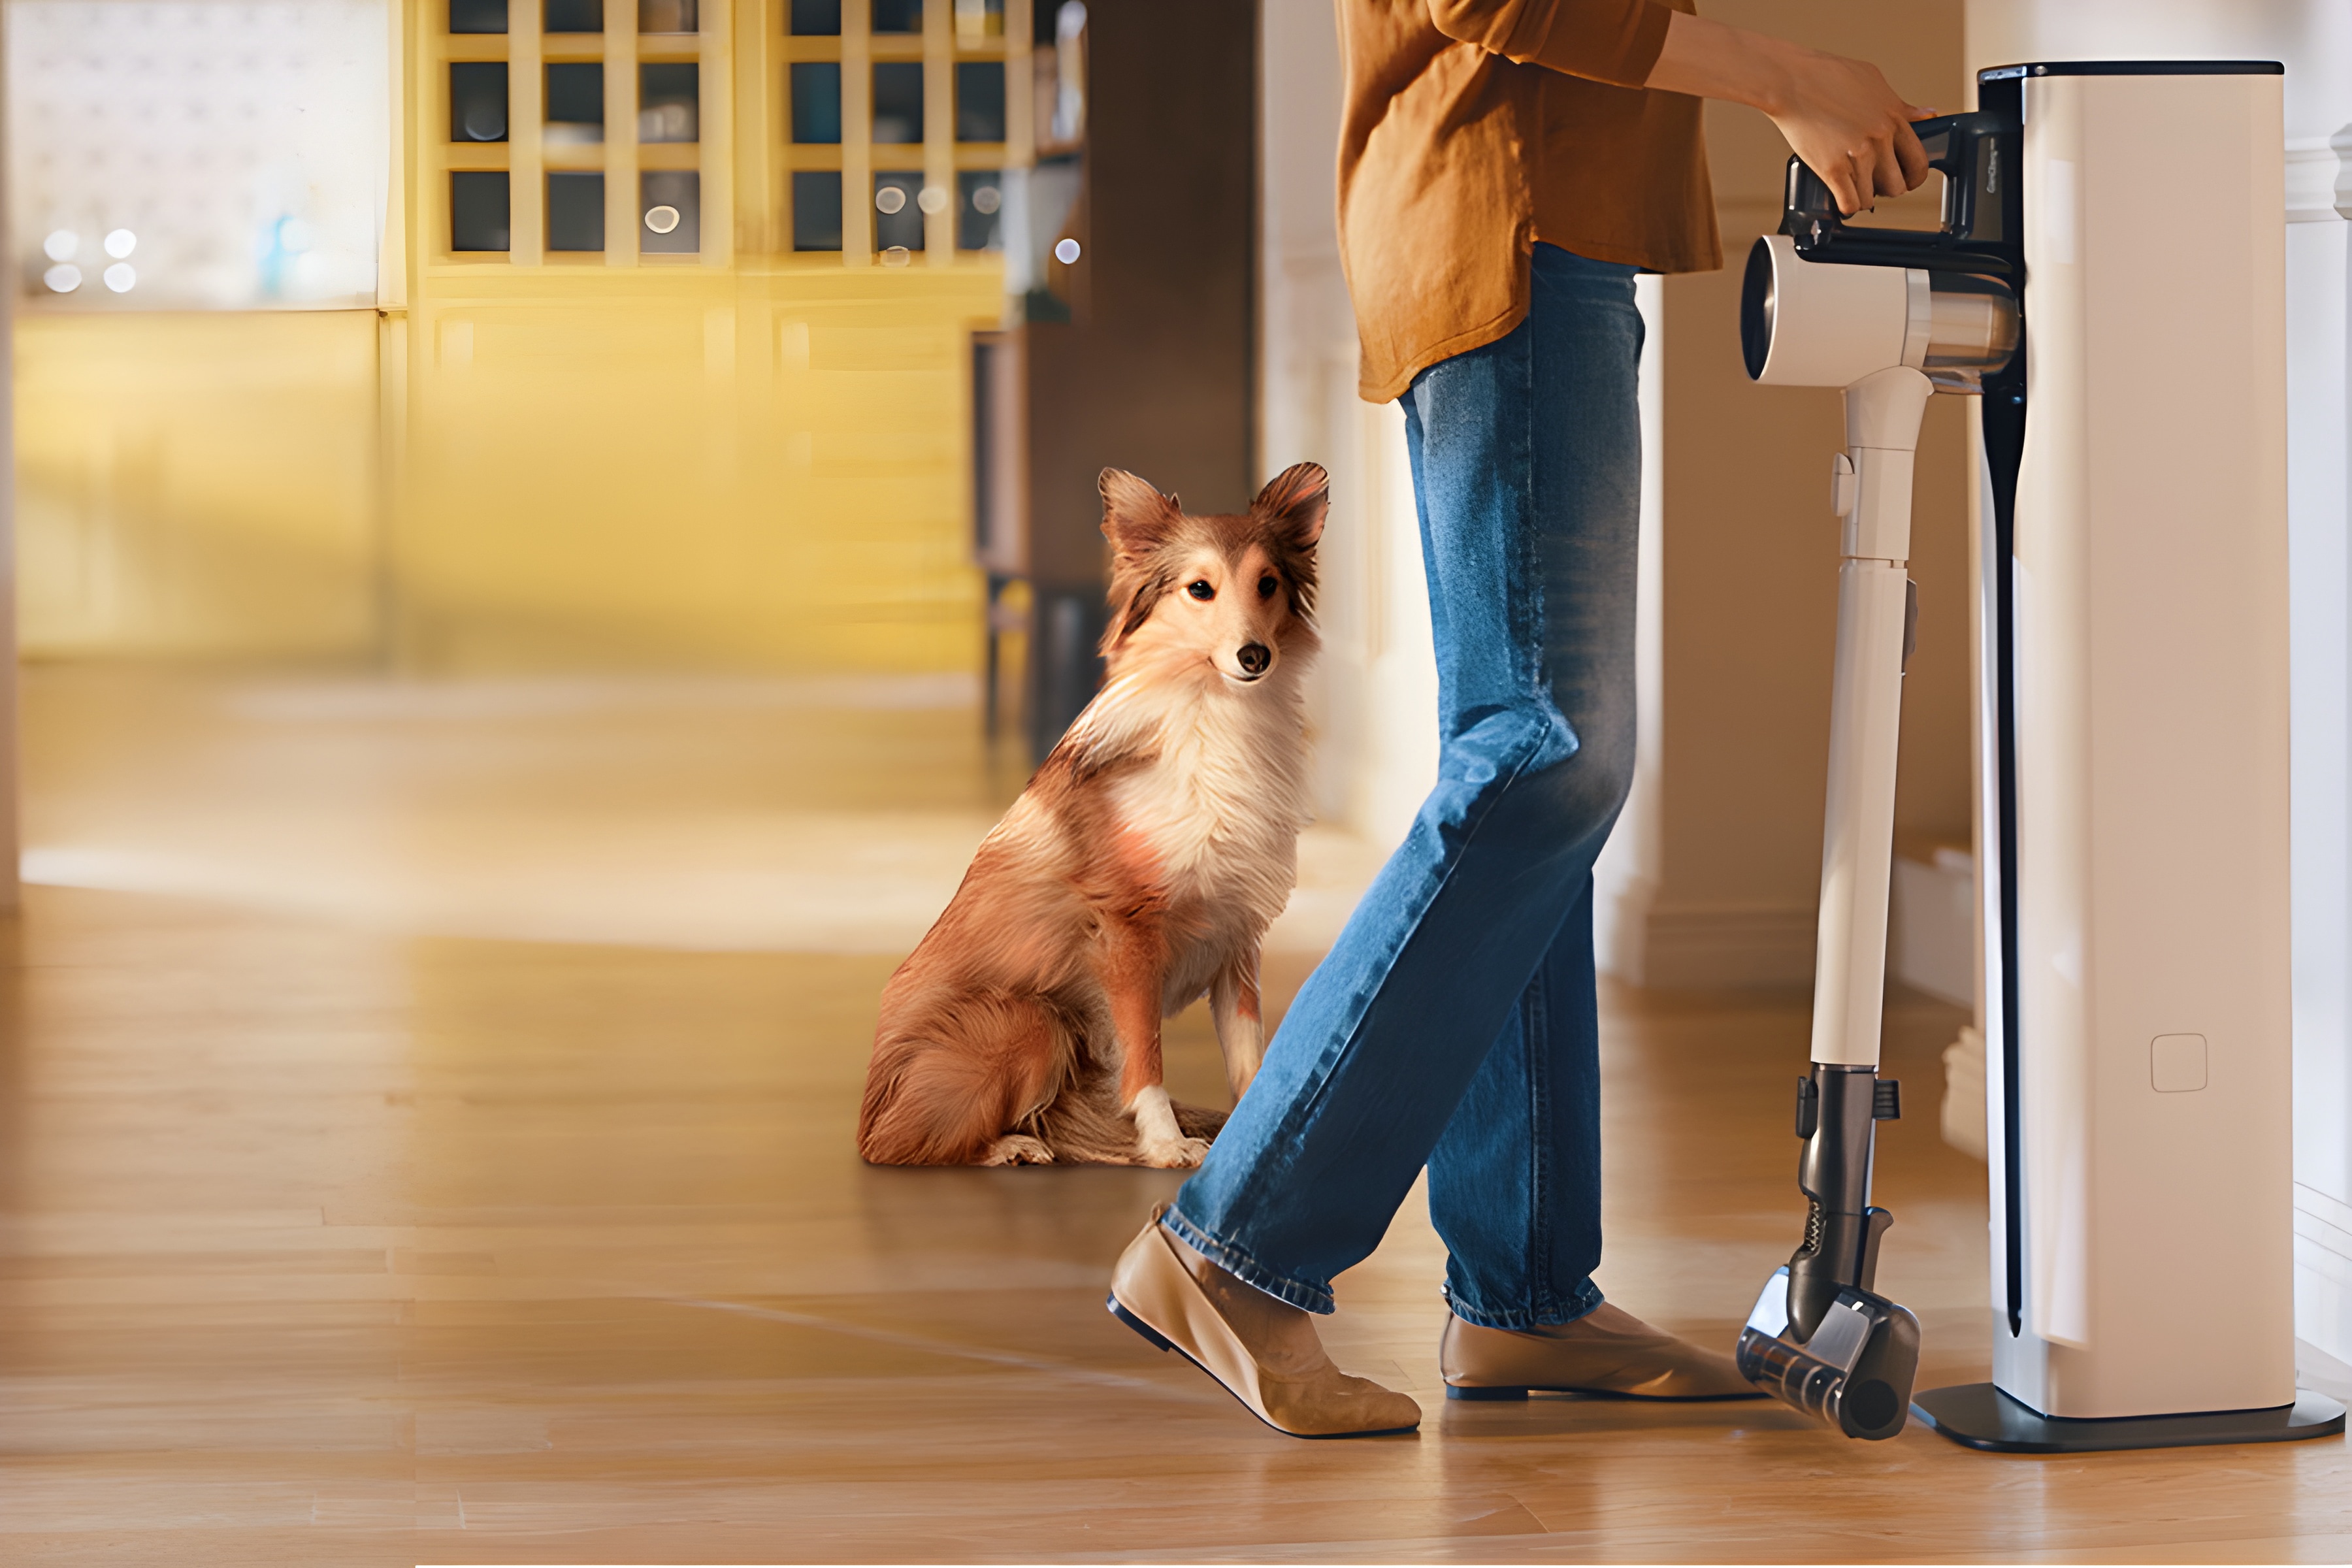 Woman placing LG Cordless Vacuum in standalone docking station next to dog